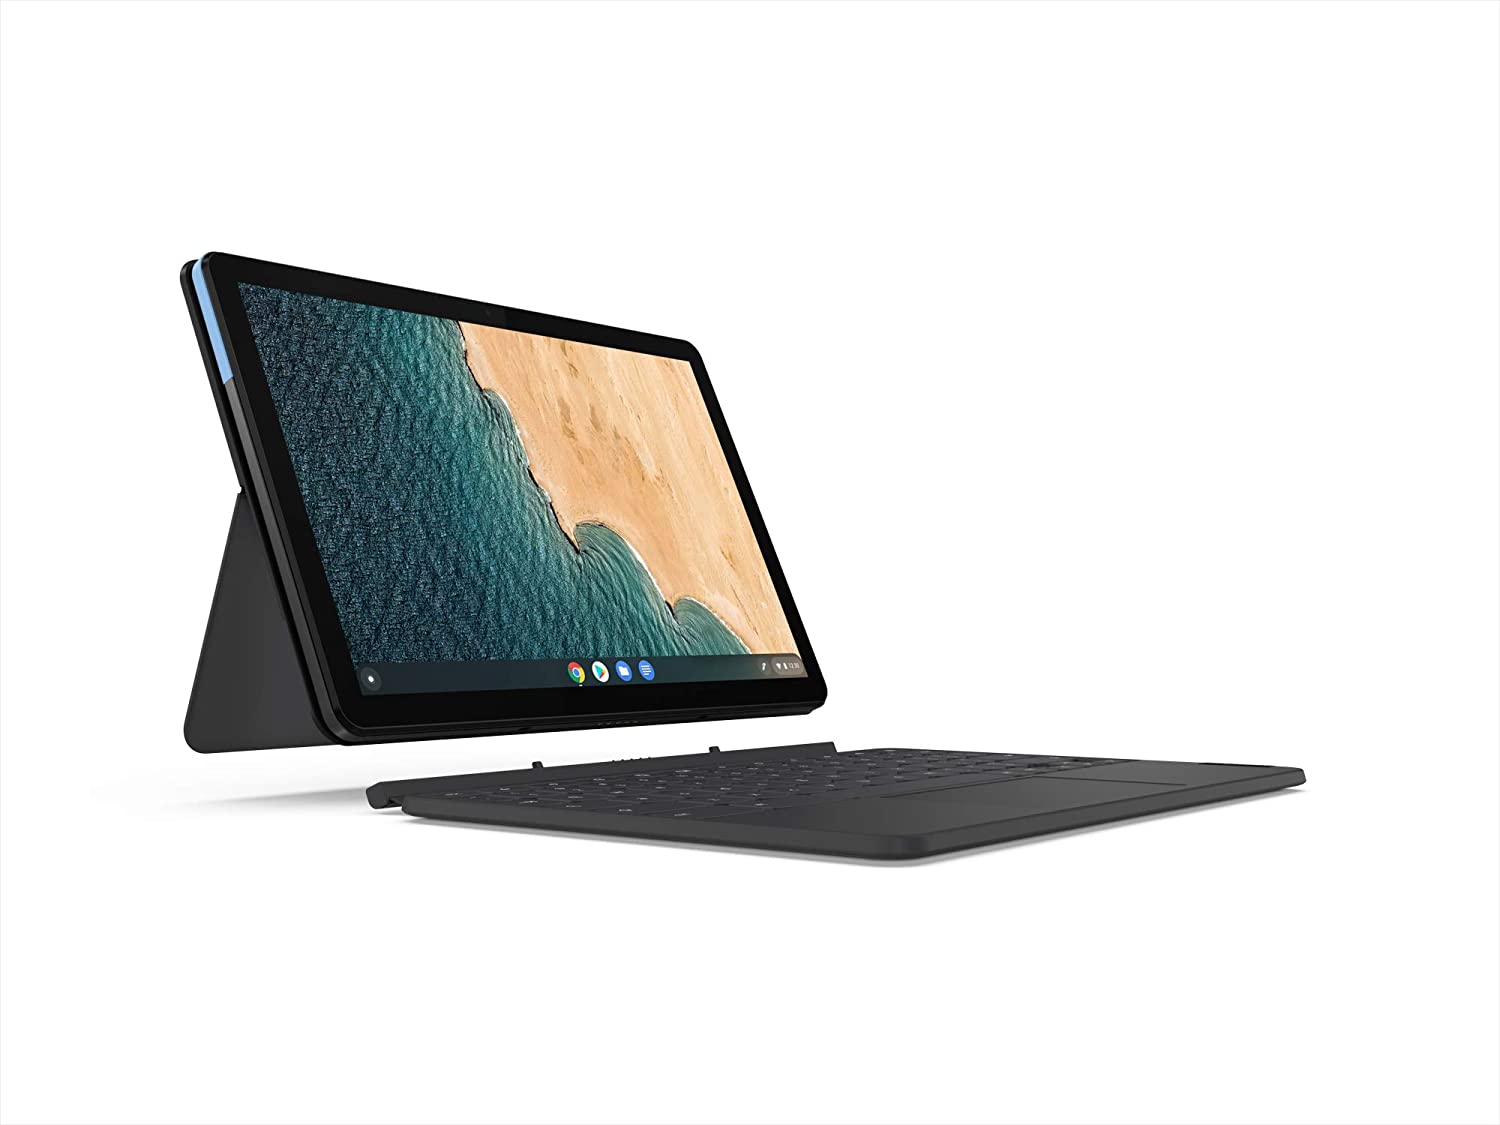 10 Best Laptop For Teenager Under 500 In 2022 [Buying Guide]